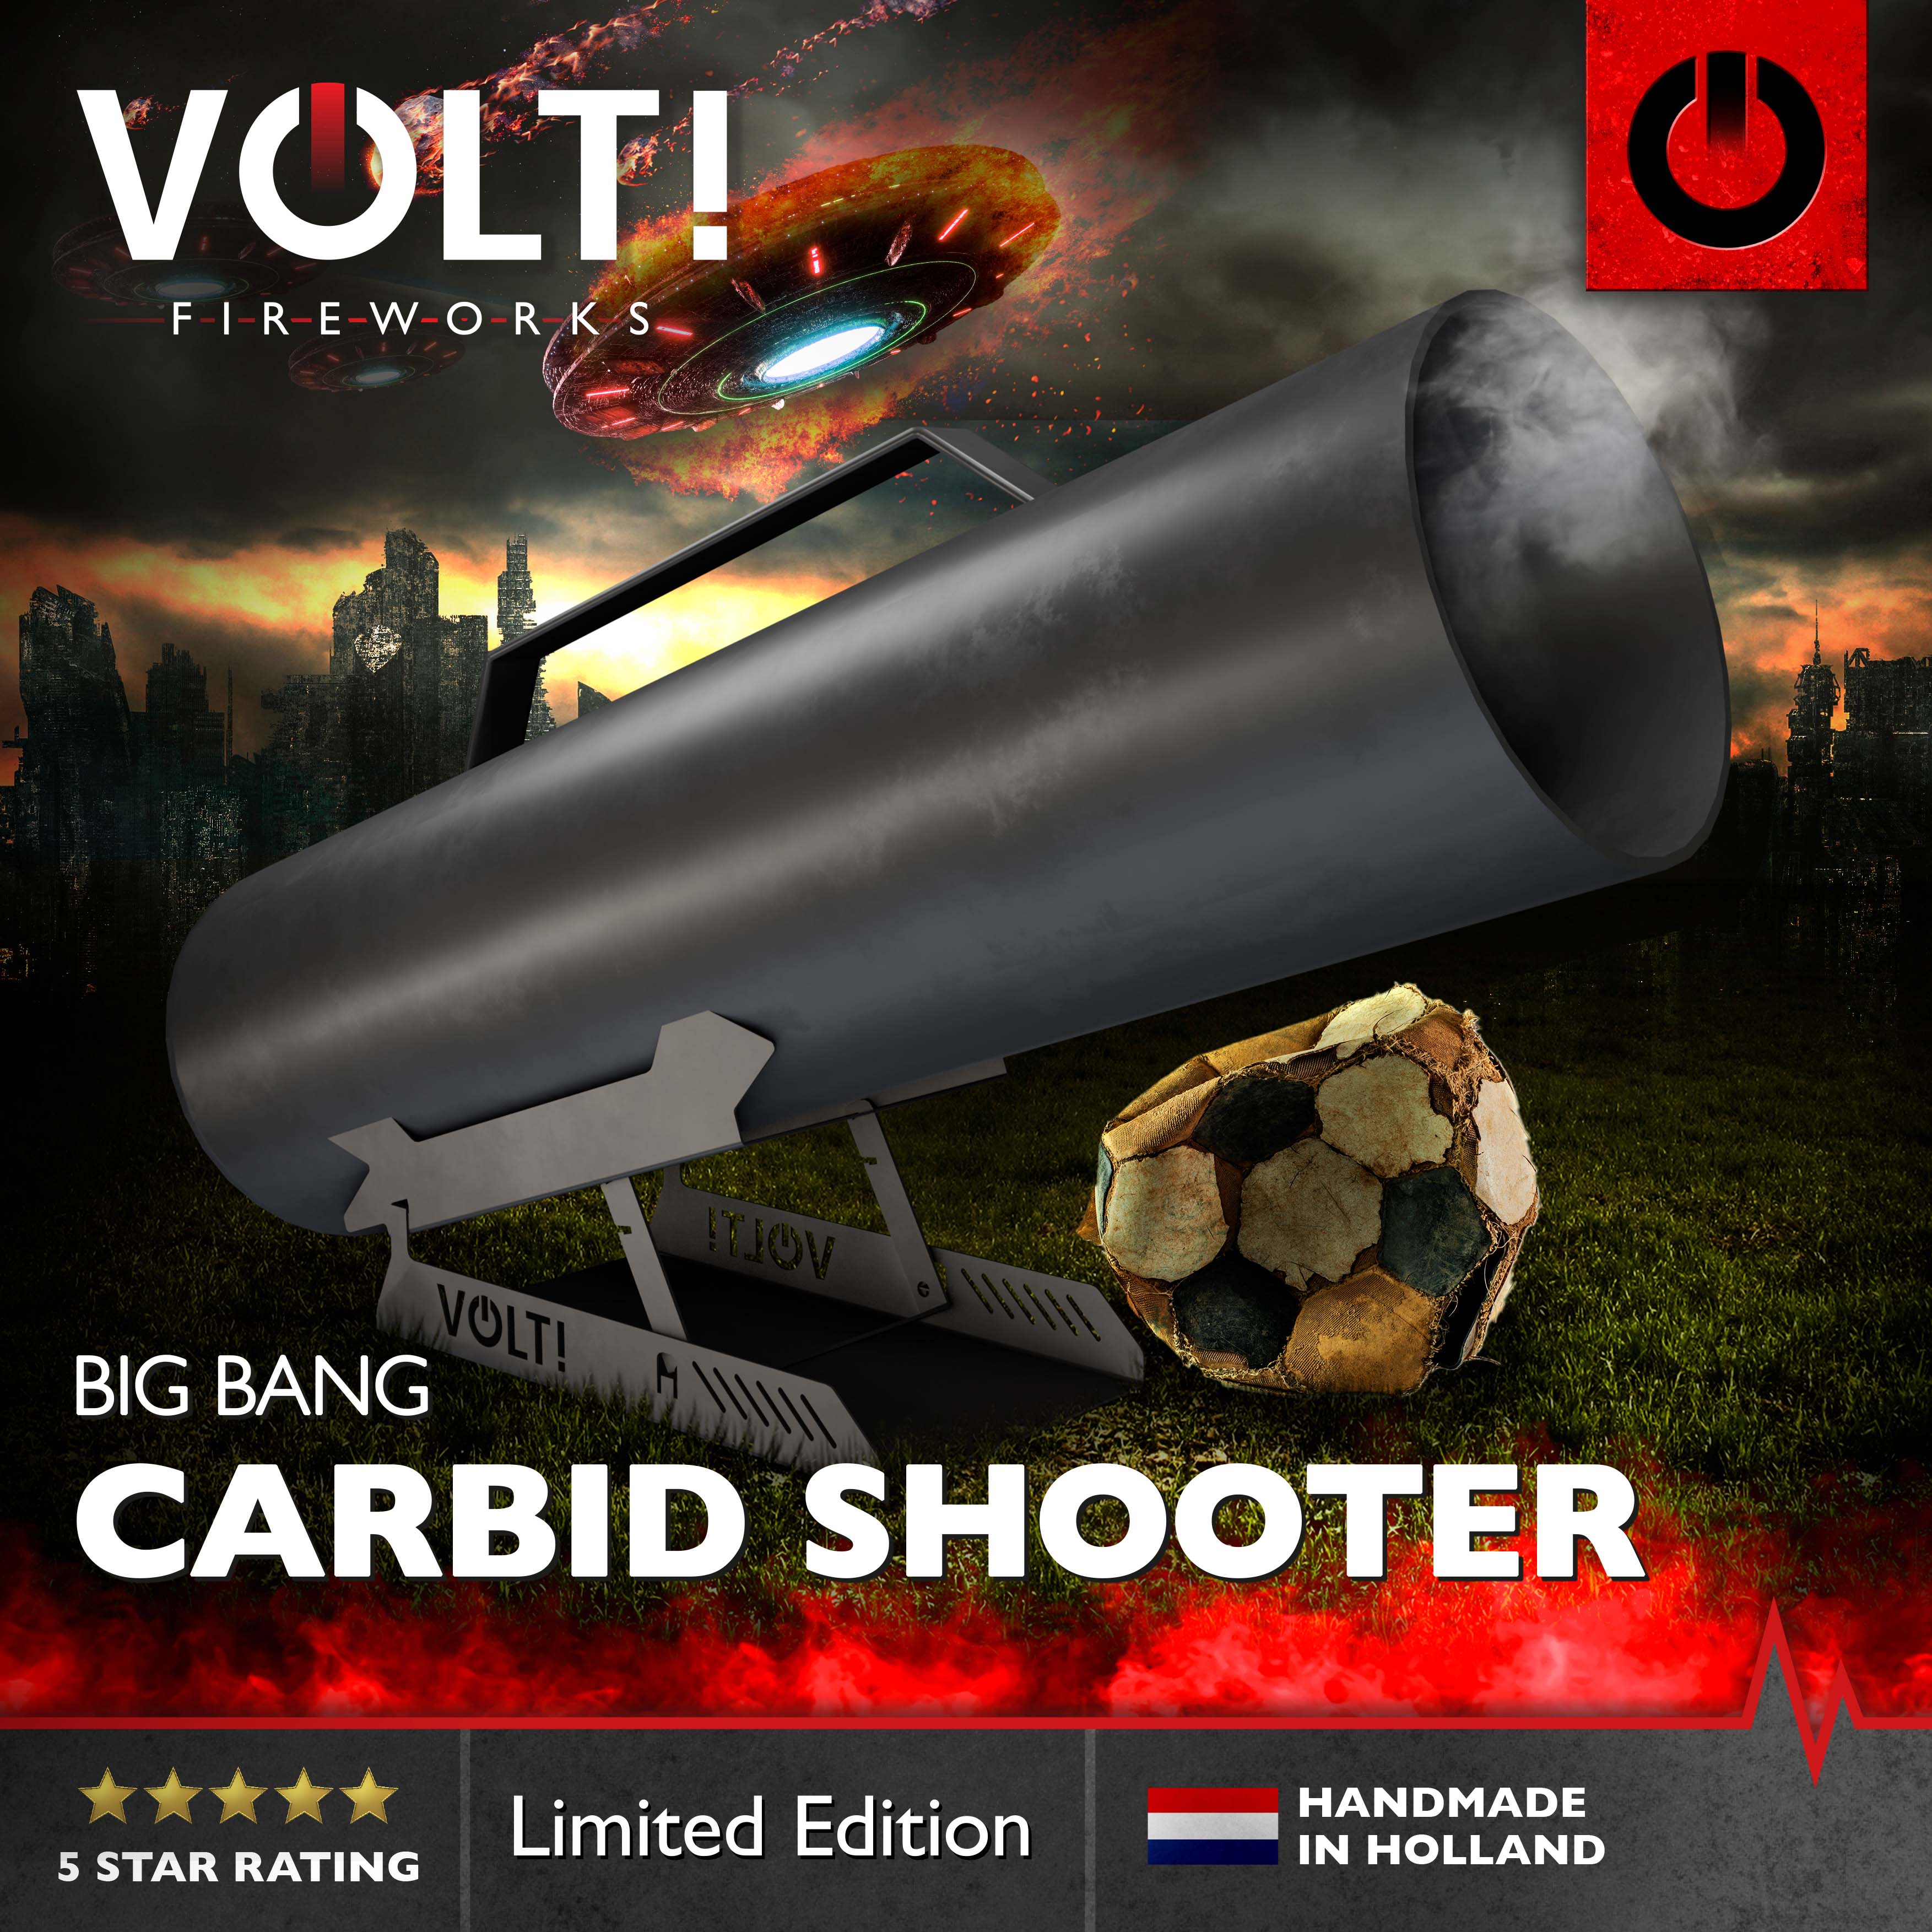 carbit shooter limited edition